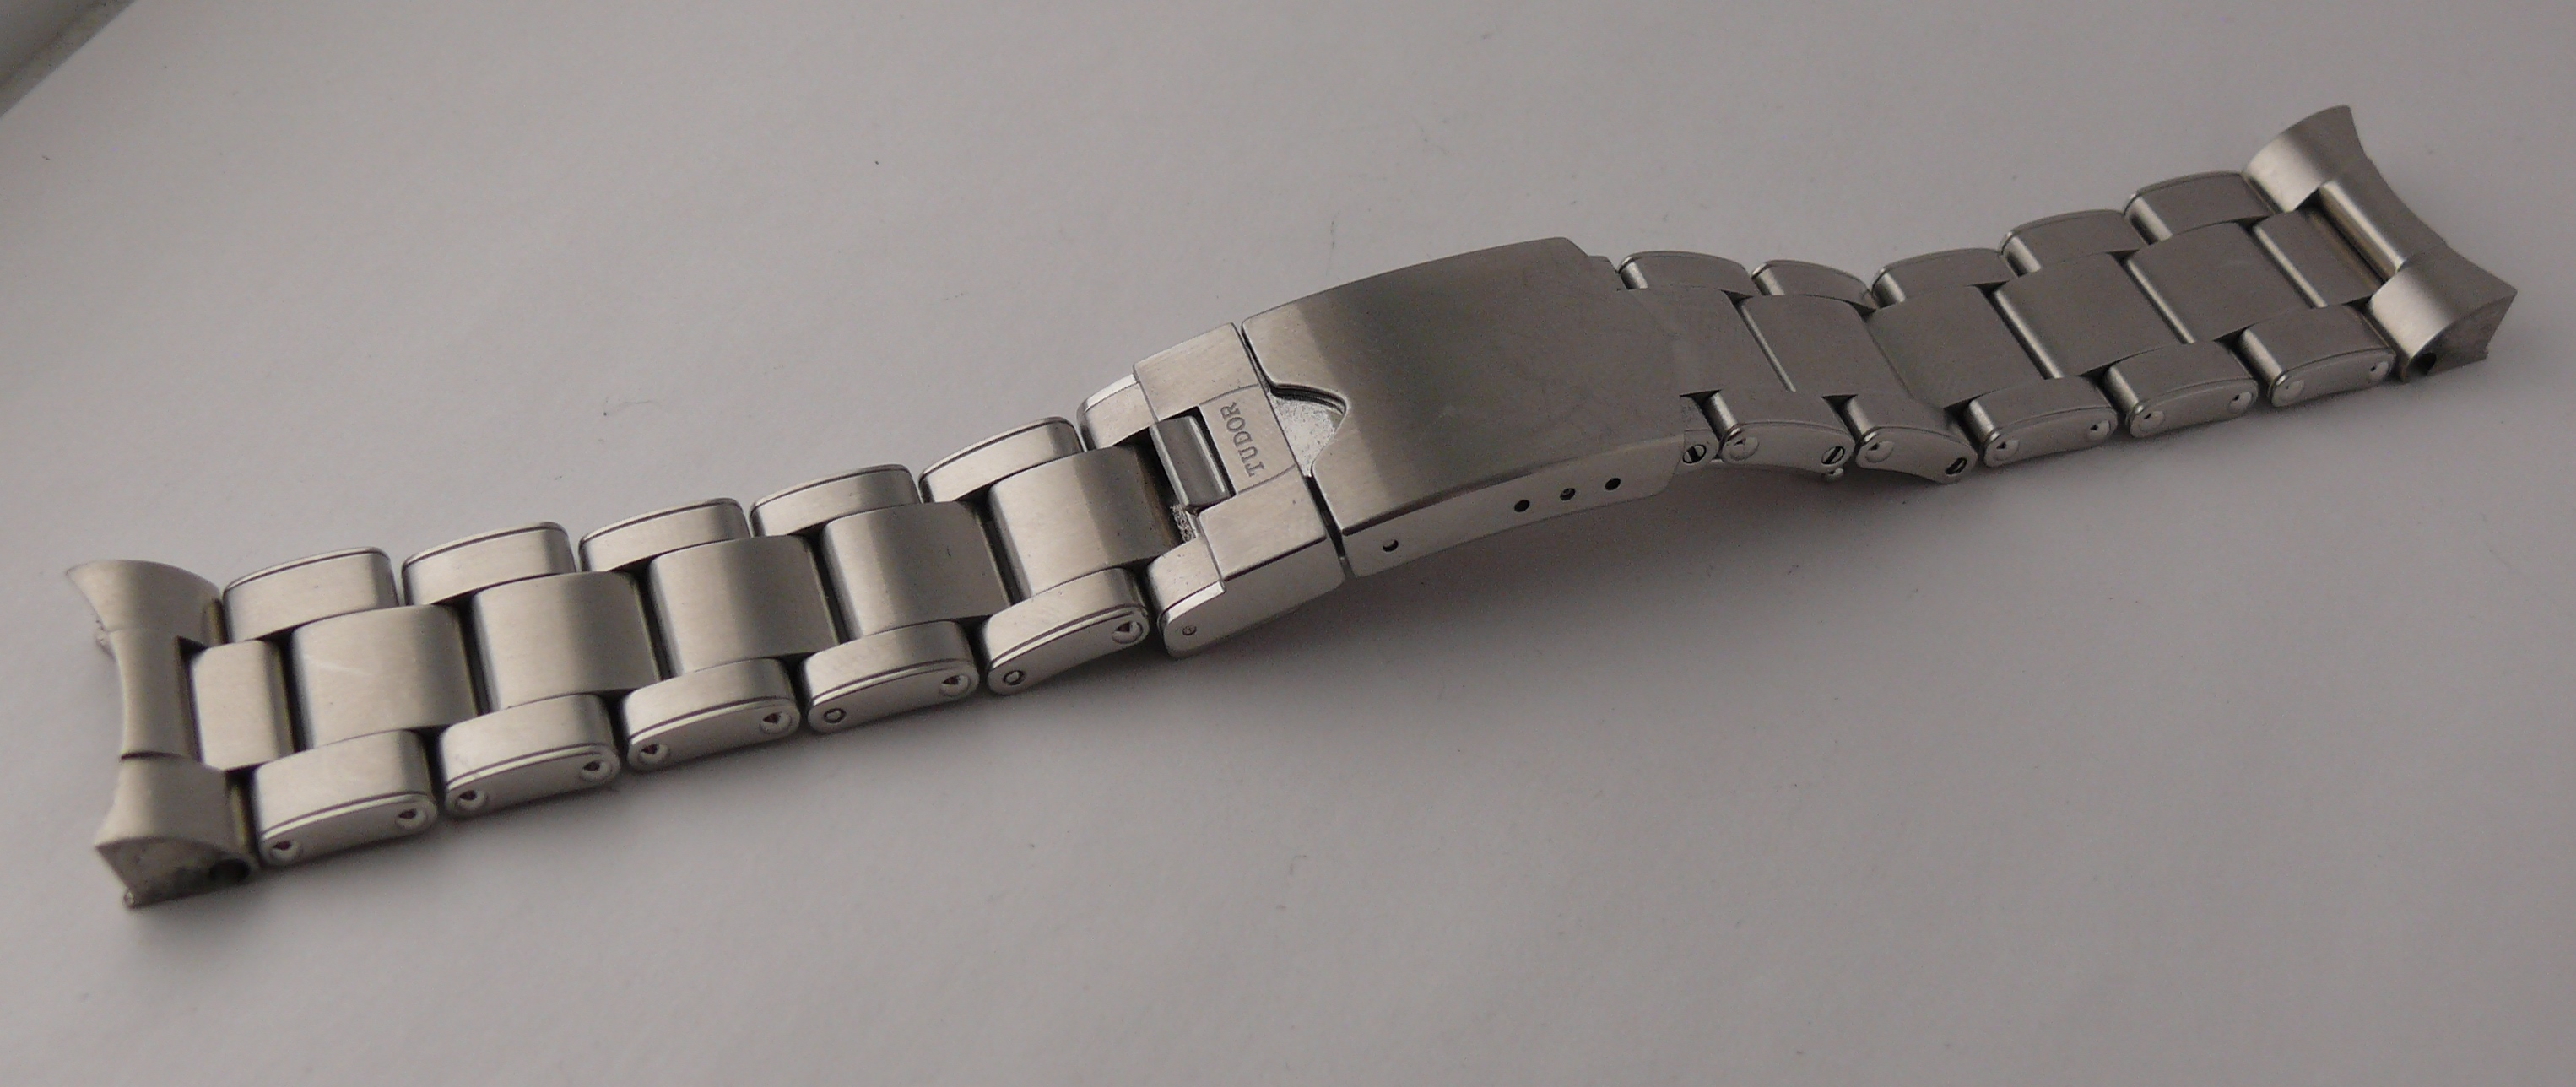 Genuine Tudor Black Bay 58 Fifty Eight 20mm Rivet Style Stainless Steel Bracelet. Comes in its - Image 7 of 7